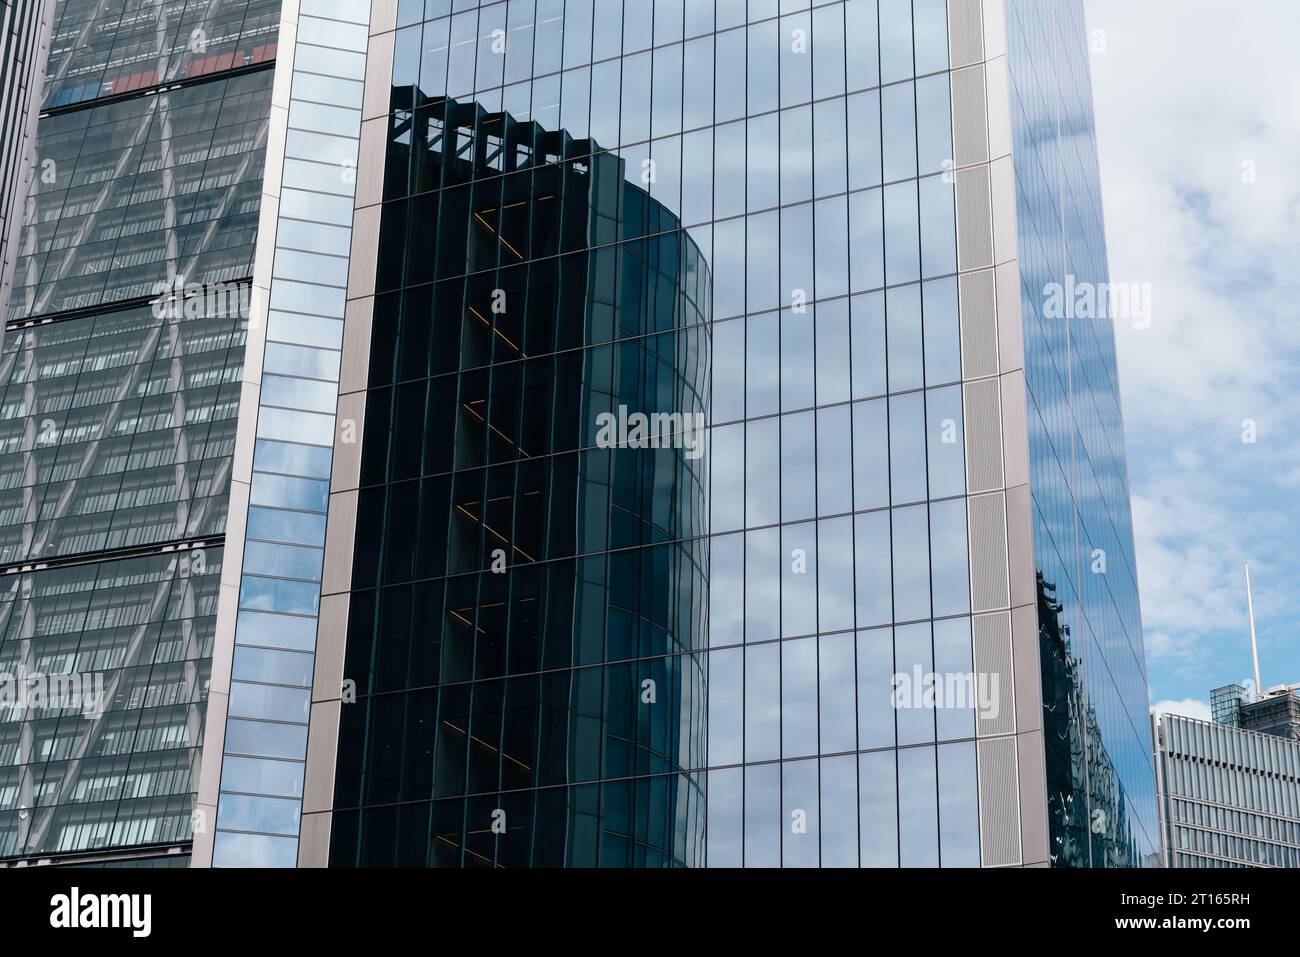 London, UK - August 25, 2023: Reflections on curtain wall glass facade of modern office skyscrapers in the City of London. Stock Photo